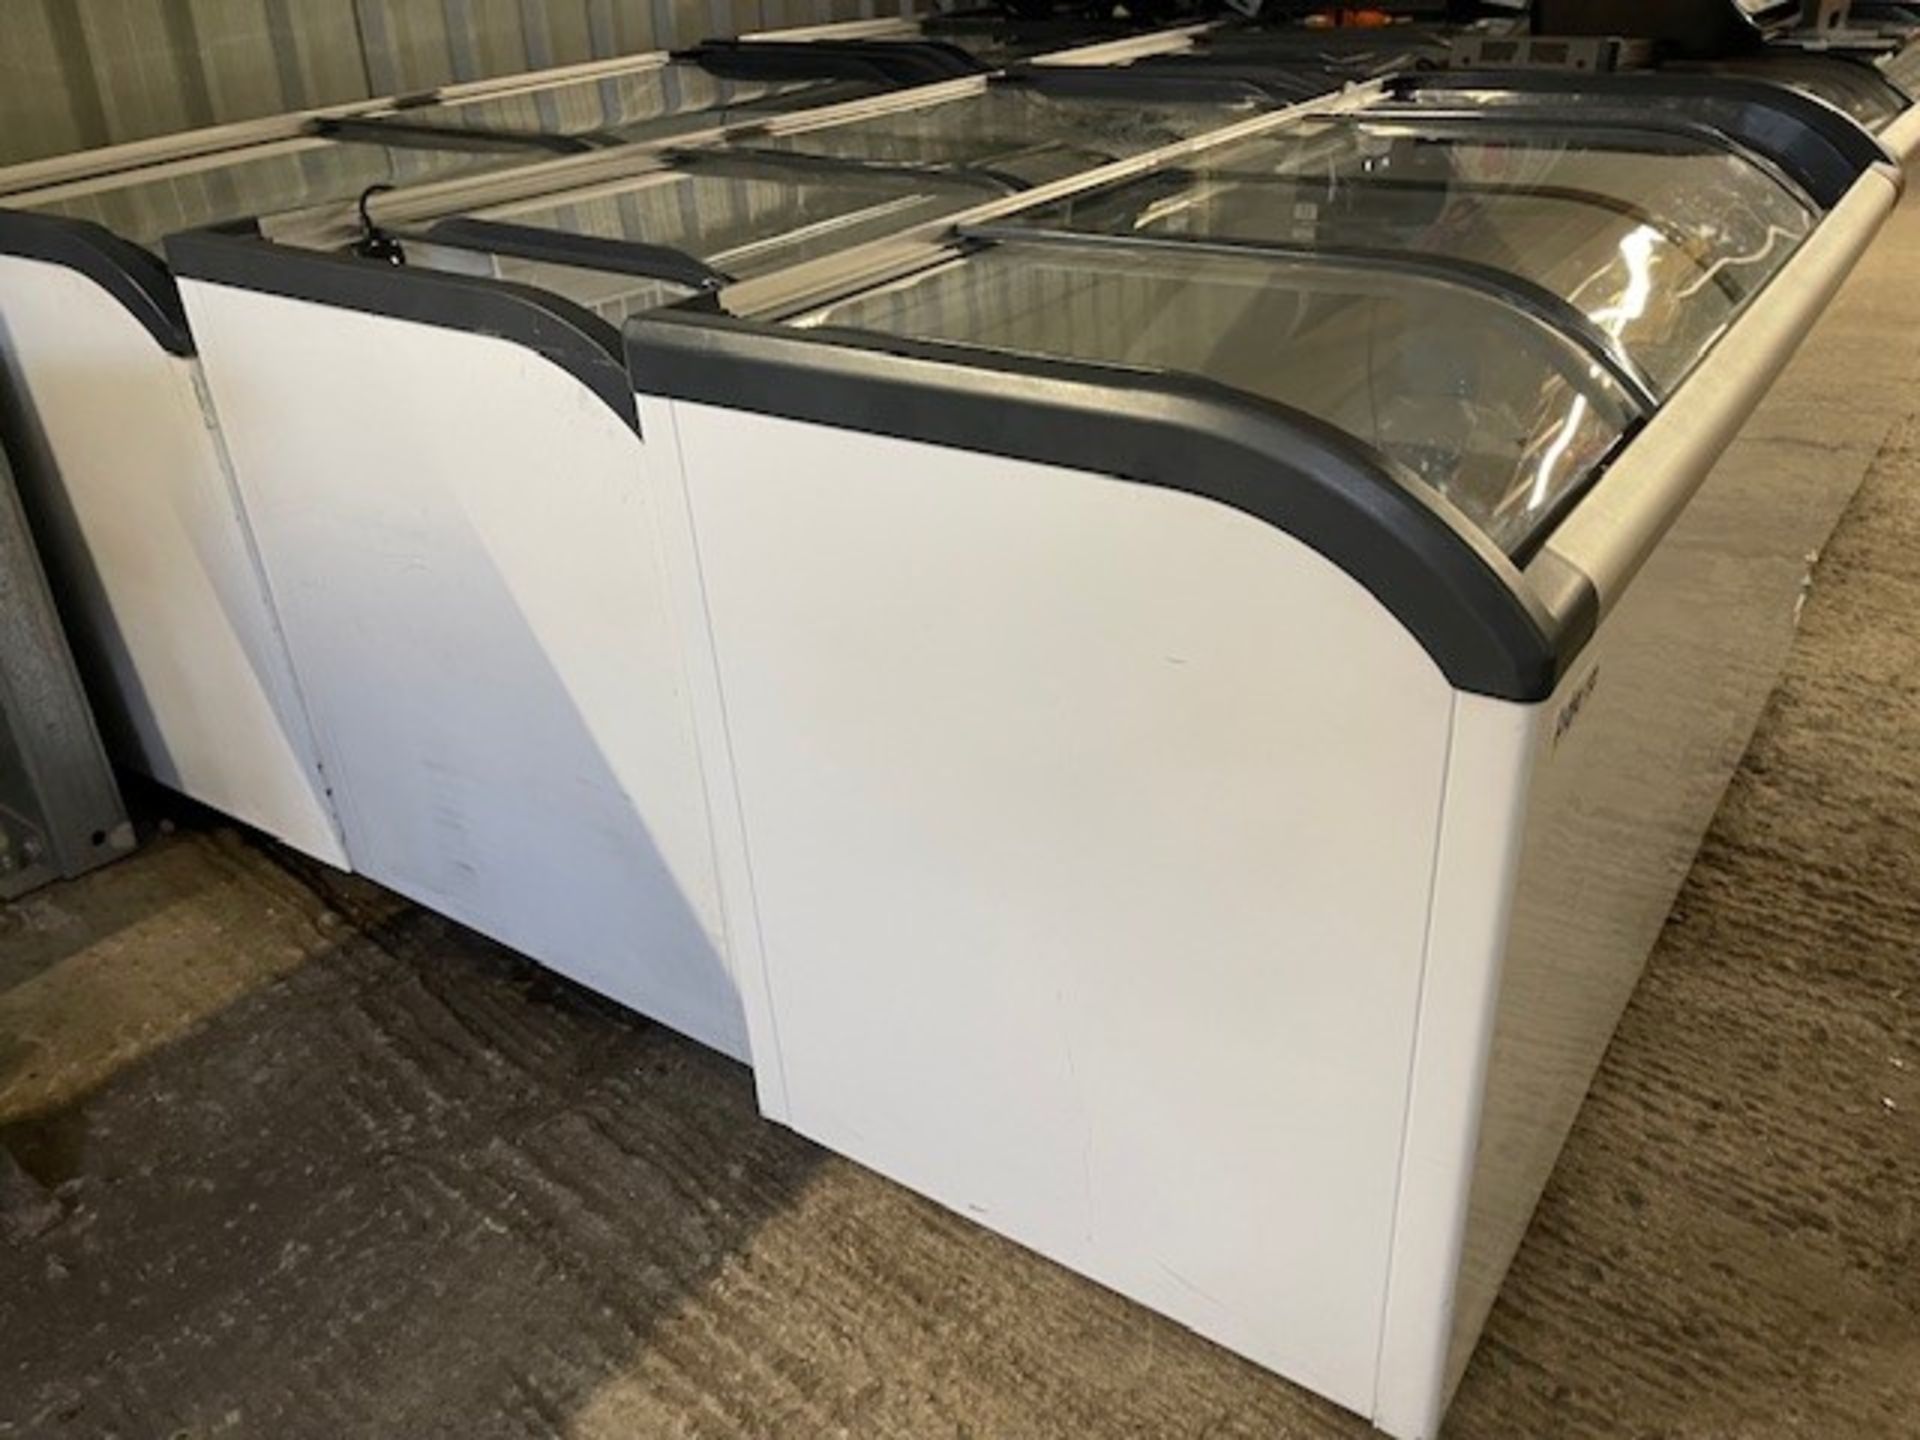 ADEXA SD-520Q CHEST FREEZER *** NOTE ASSET(S) LOCATED IN CROYDON - WILL REQUIRE REMOVAL BY FRIDAY - Image 2 of 9